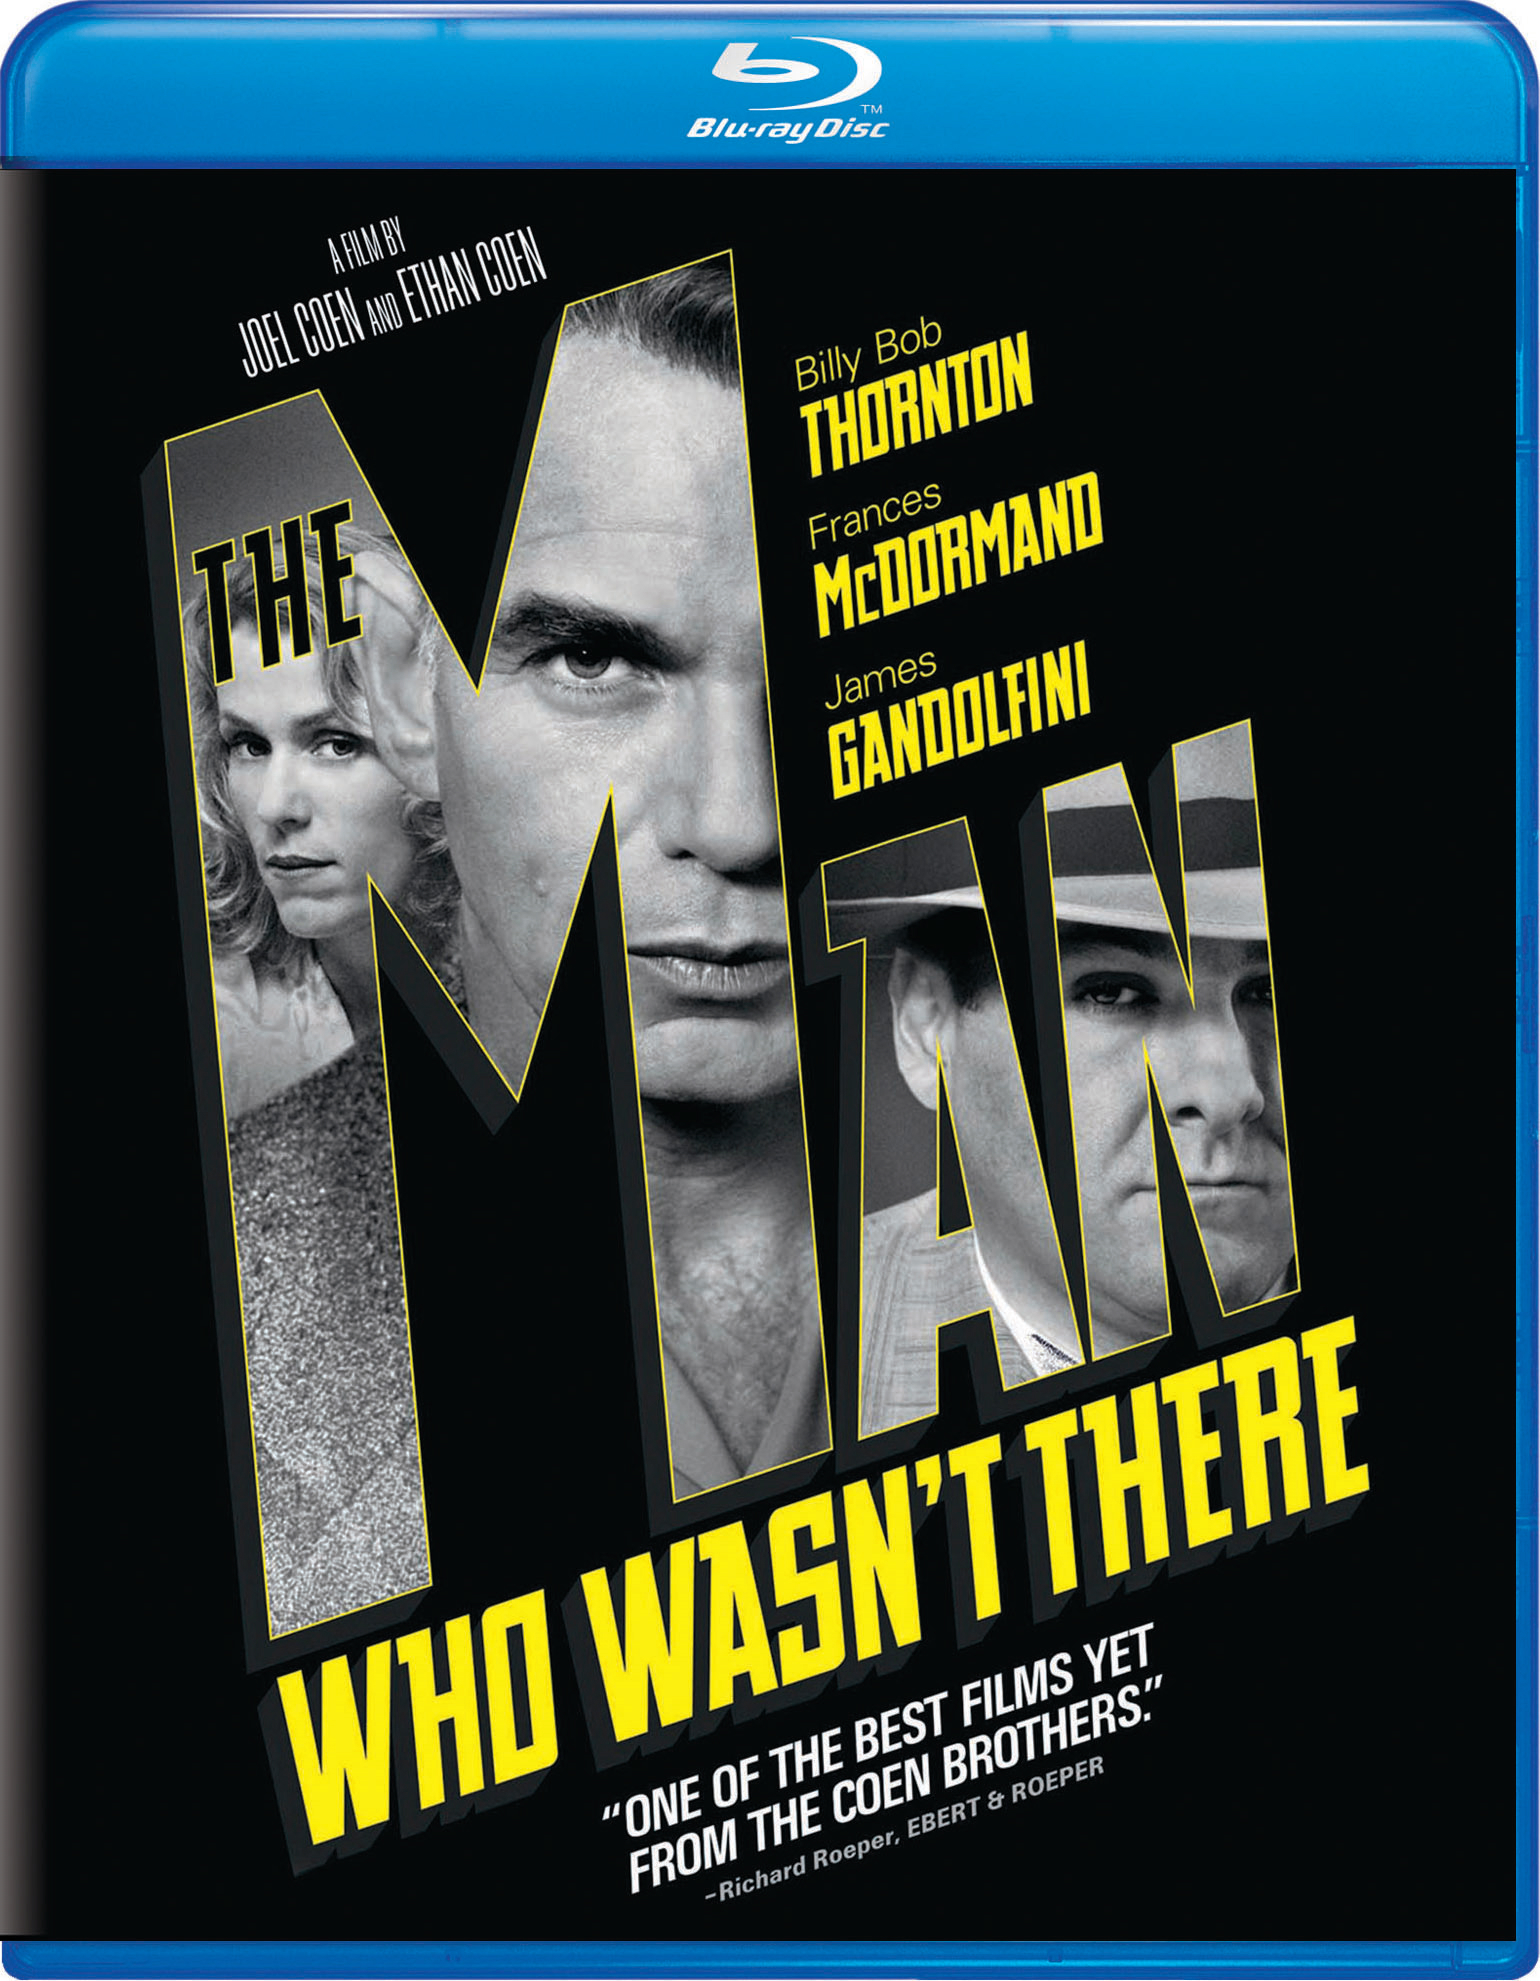 The Man Who Wasn't There - Blu-ray [ 2001 ]  - Drama Movies On Blu-ray - Movies On GRUV